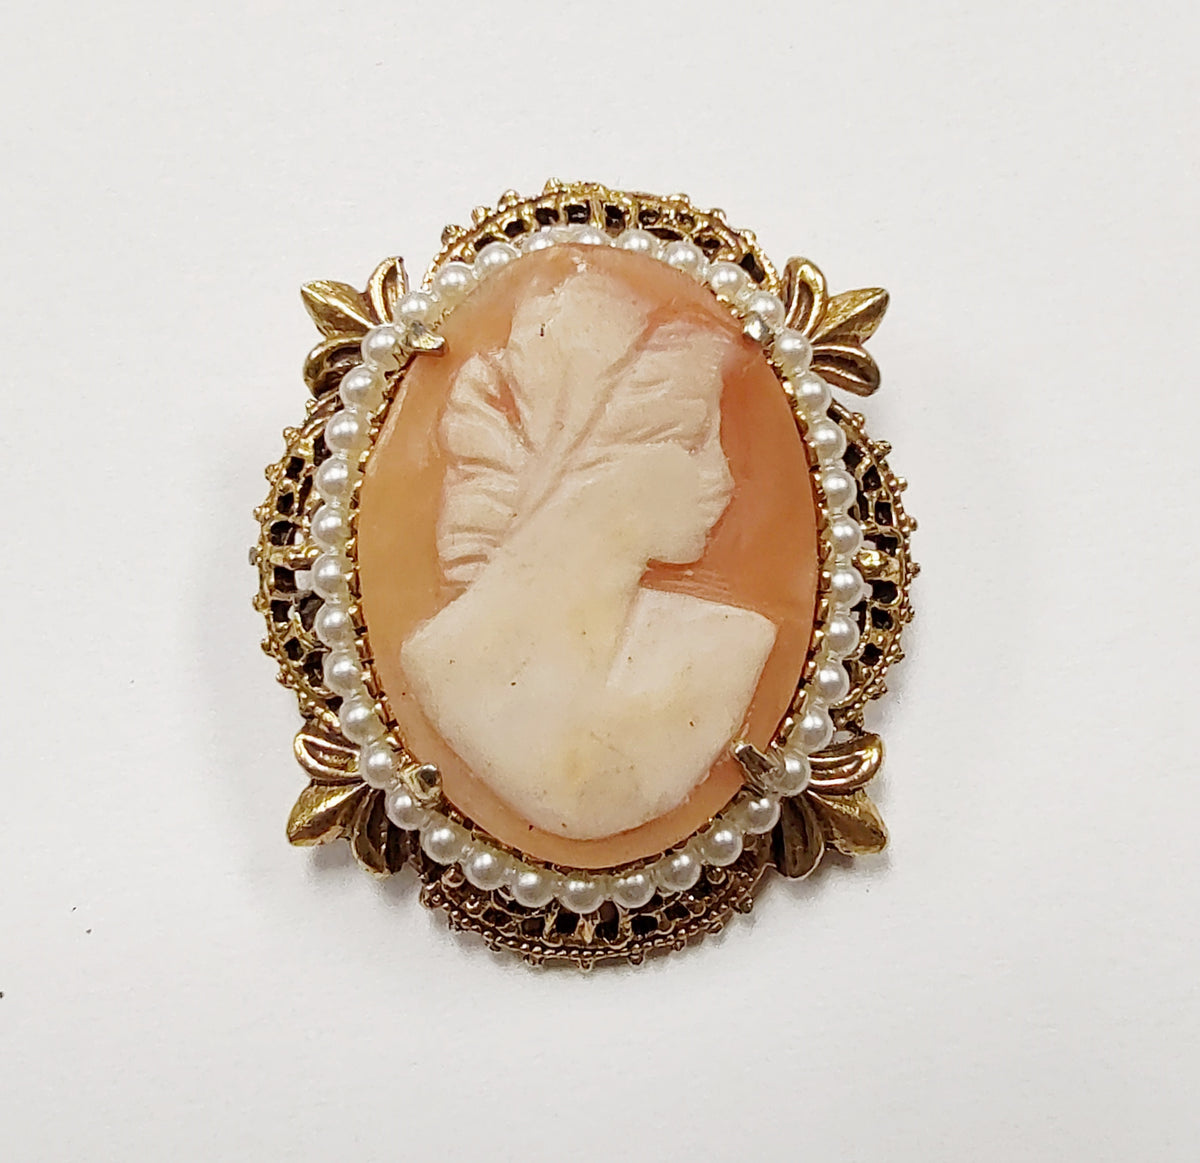 Vintage Florenza Shell Carved Cameo Brooch Pendant - Hers and His Treasures